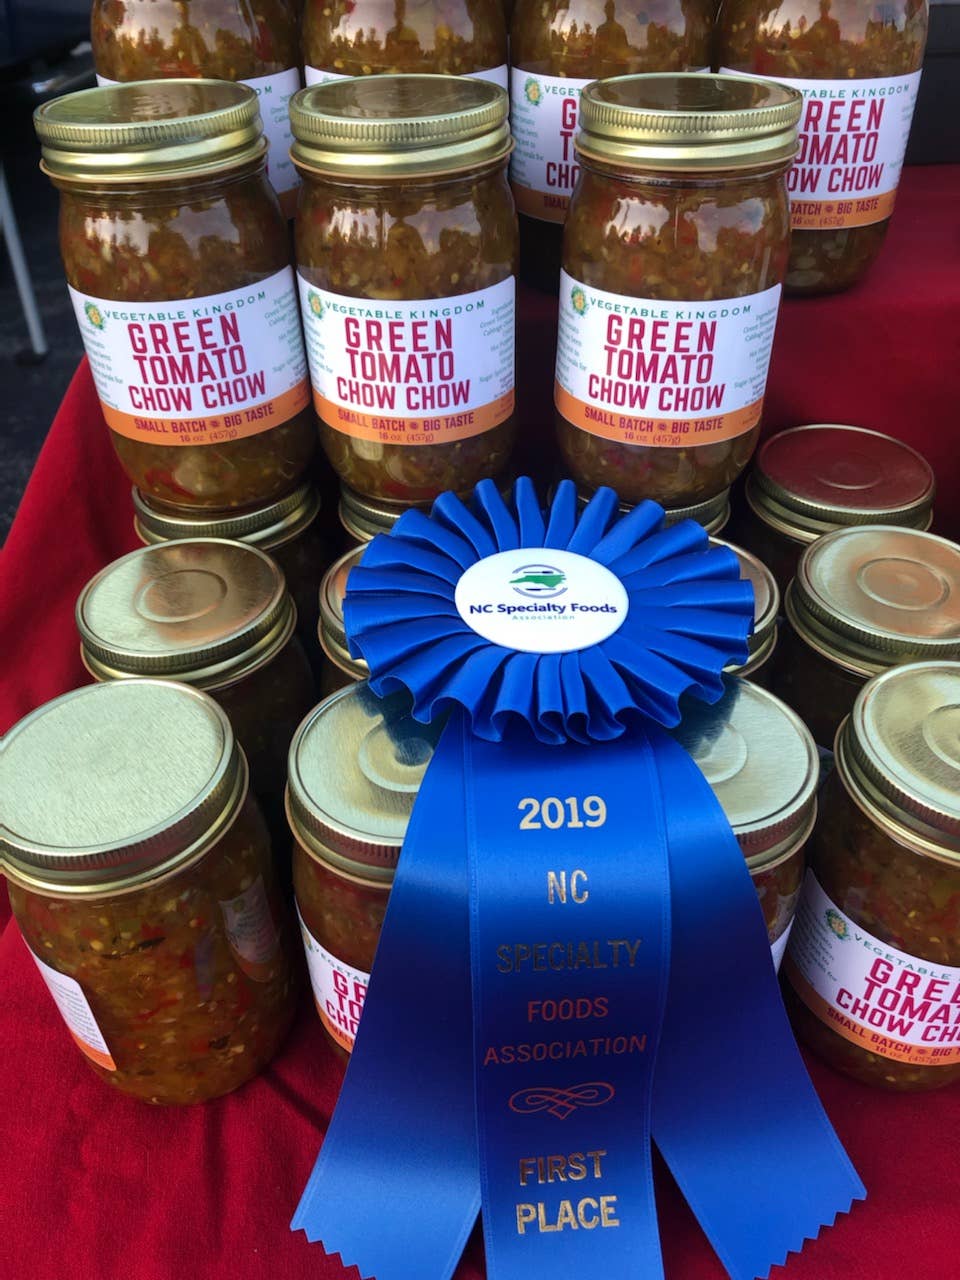 Prize Winning Chow Chow (Green Tomato Pickle)